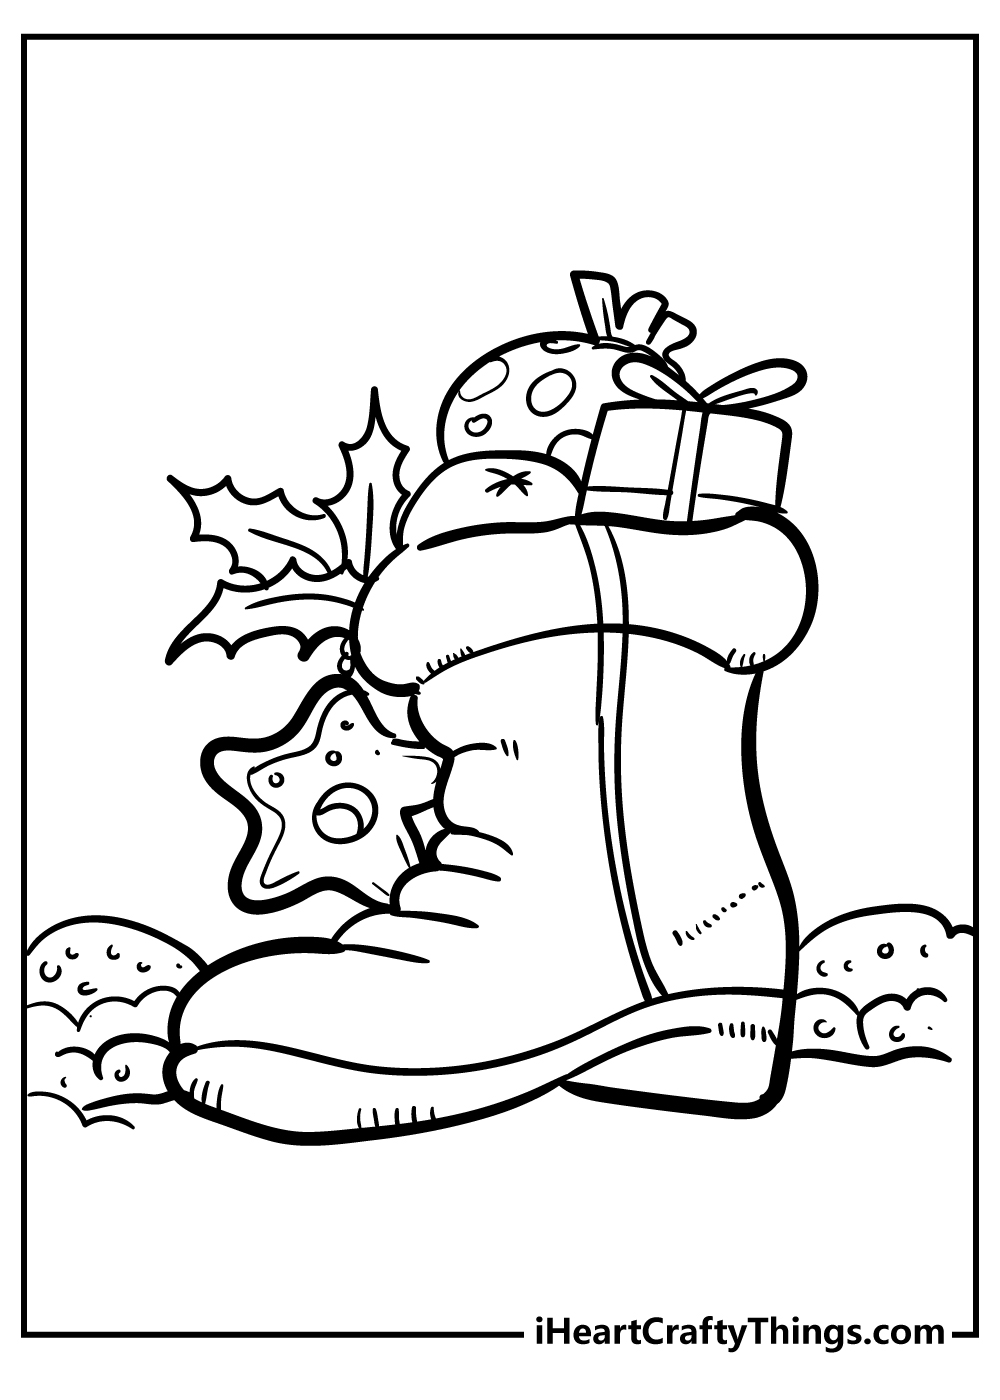 Christmas coloring pages free printables